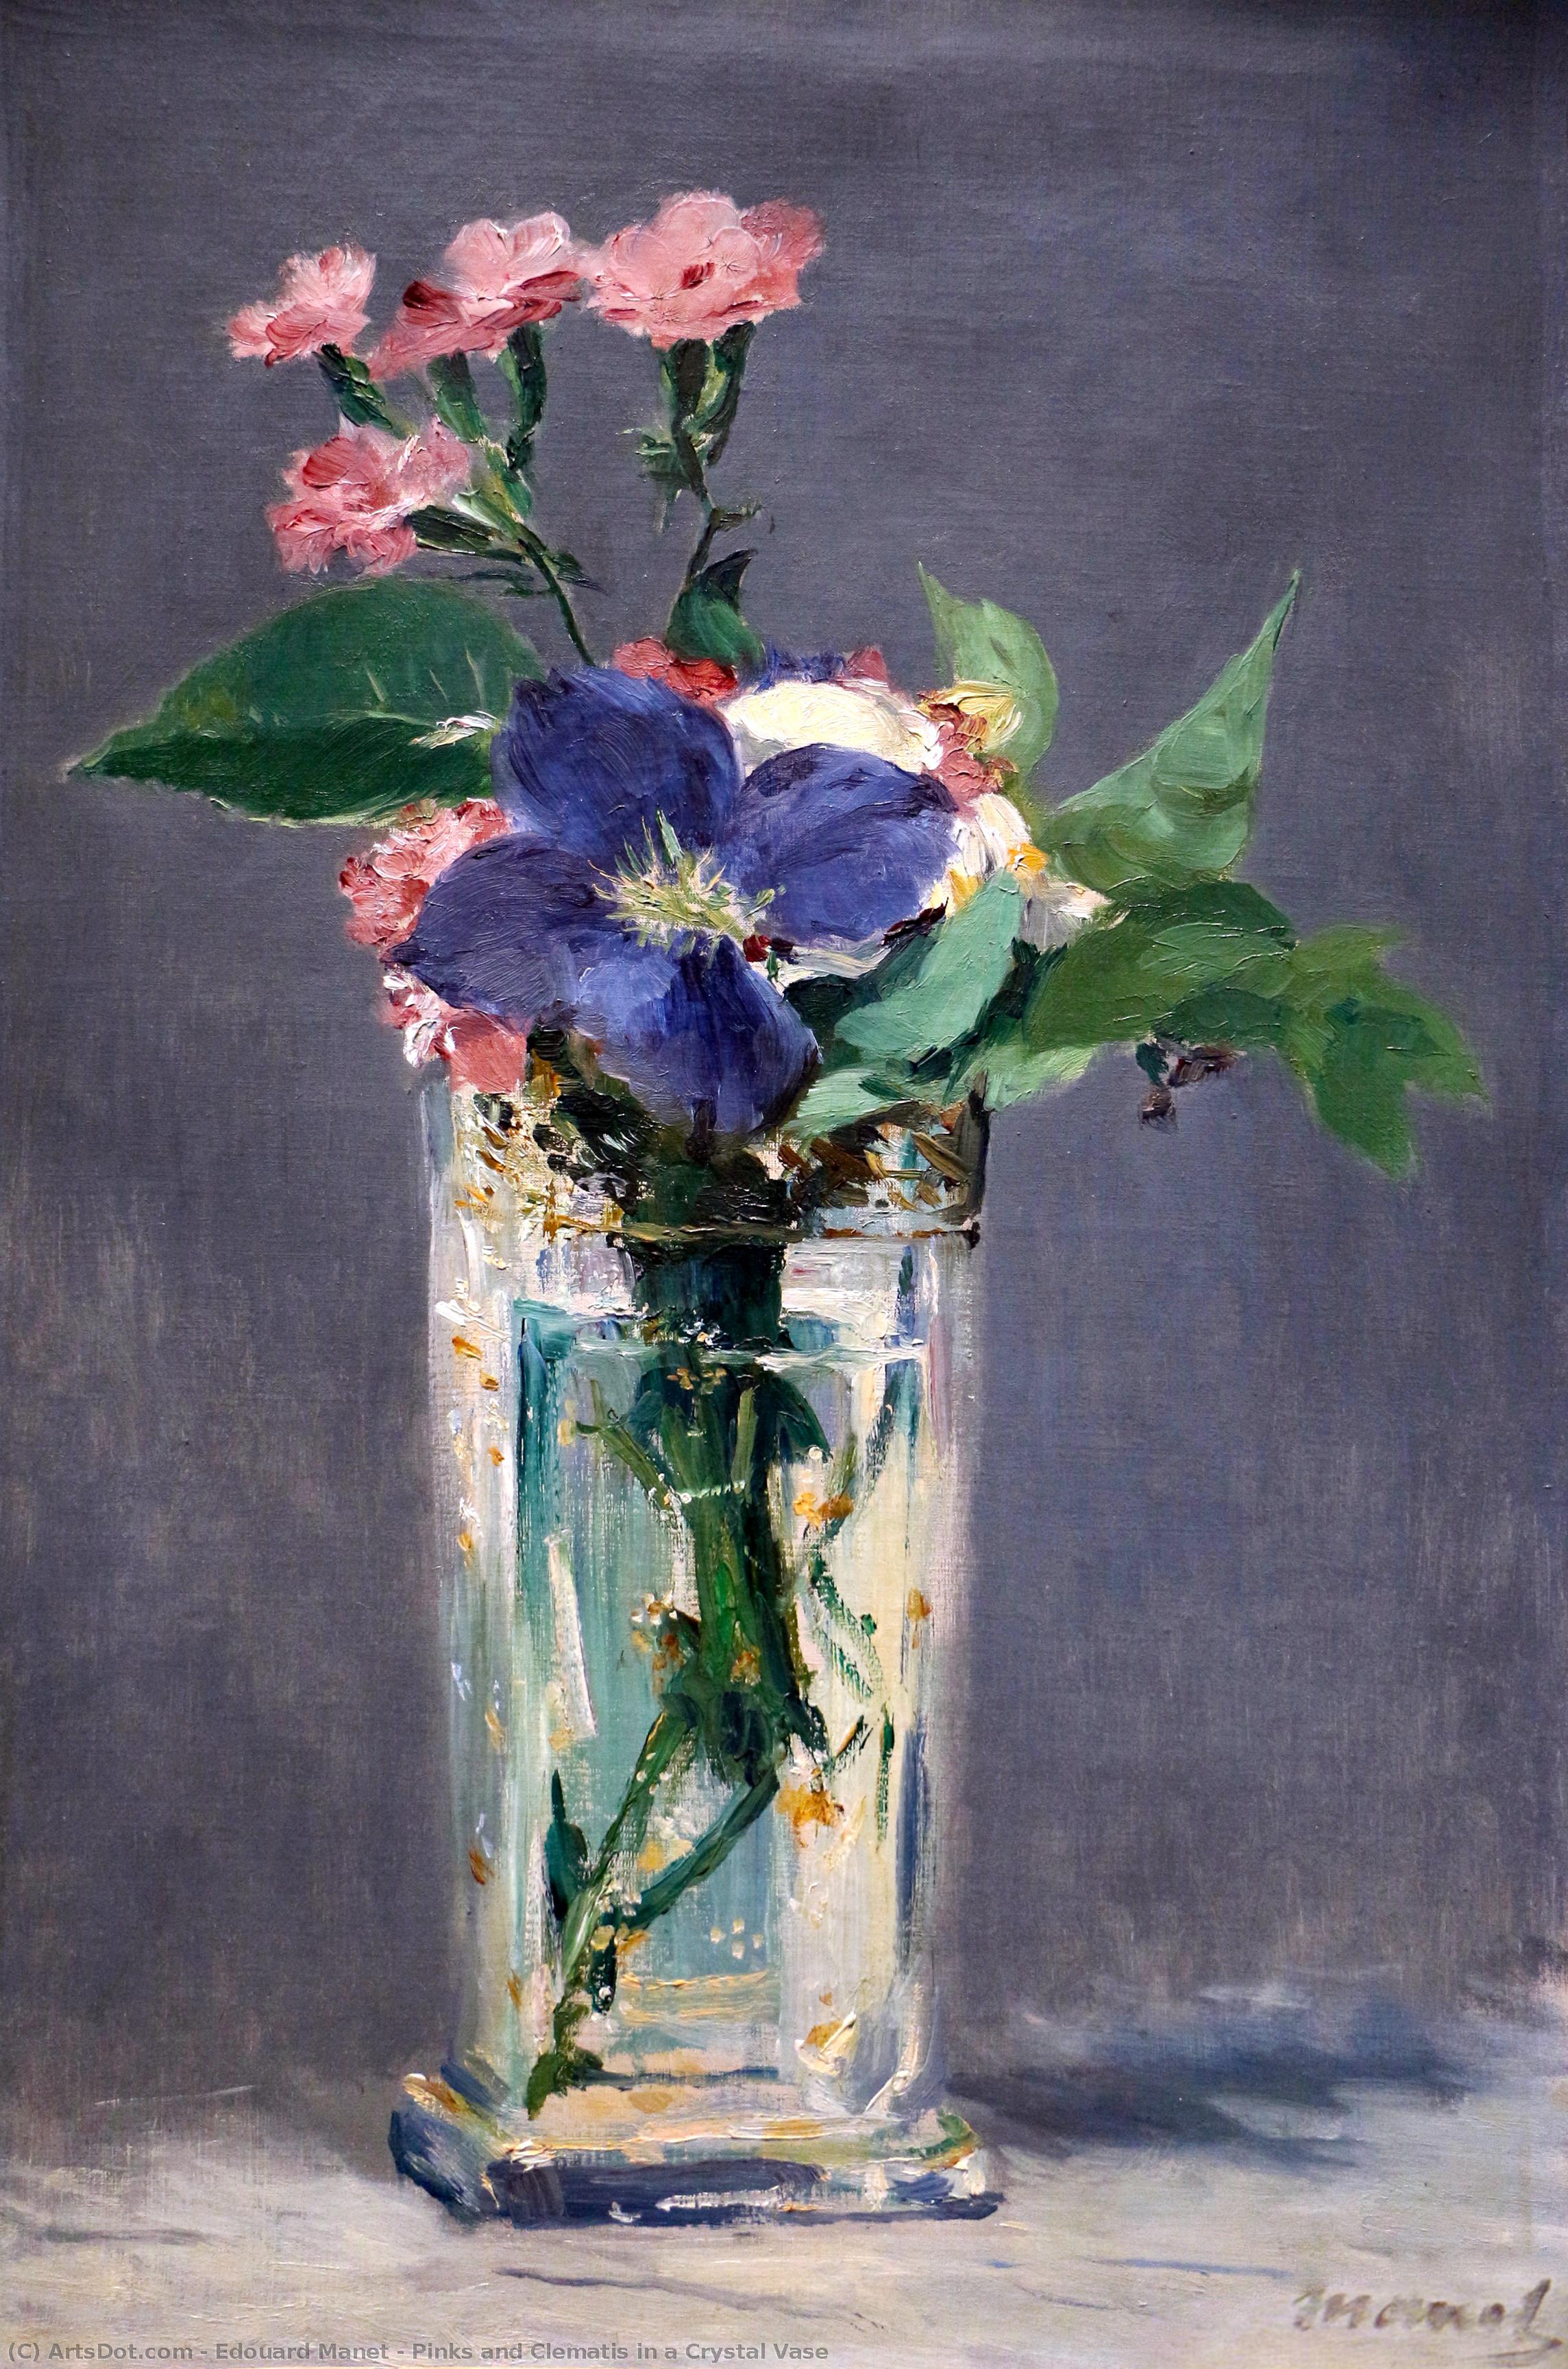 WikiOO.org - 백과 사전 - 회화, 삽화 Edouard Manet - Pinks and Clematis in a Crystal Vase